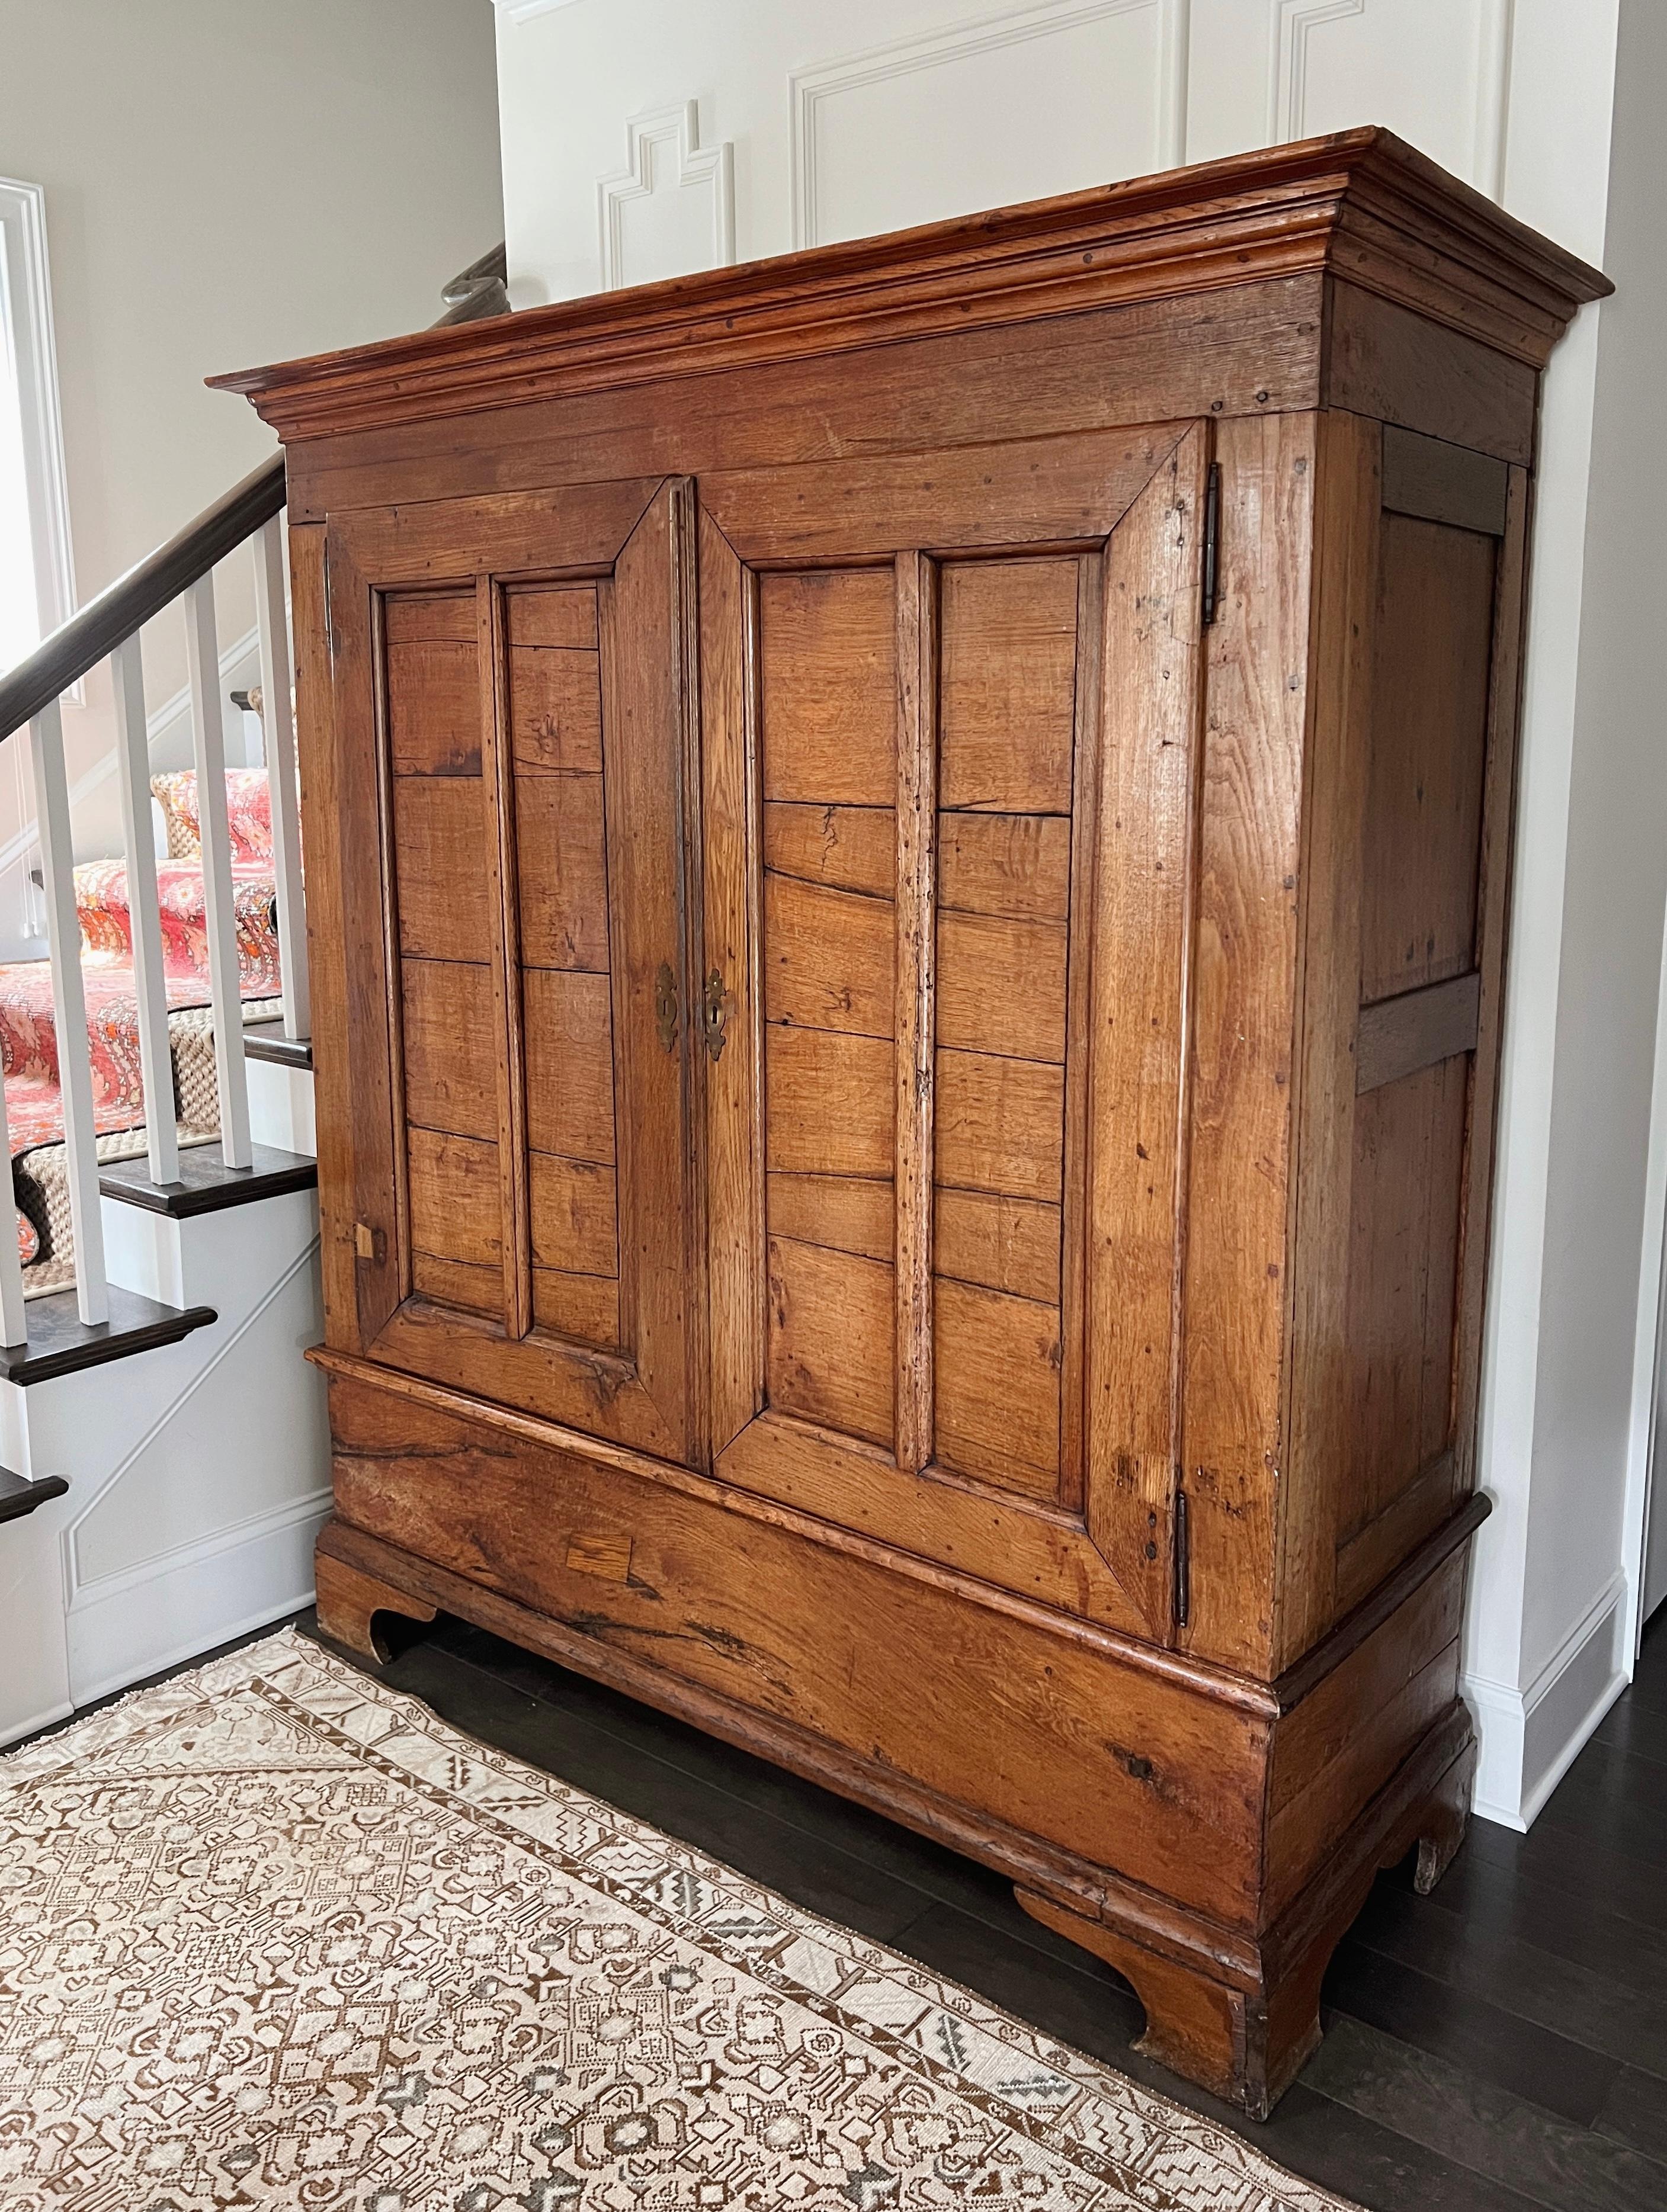 circa 19th century, Belgium.

Crafted out of wonderfully thick timber, this large armoire is nothing short of spectacular. The naturally aged and warm patina with rich graining is visible throughout. 

The left-hand door closes with a beautiful